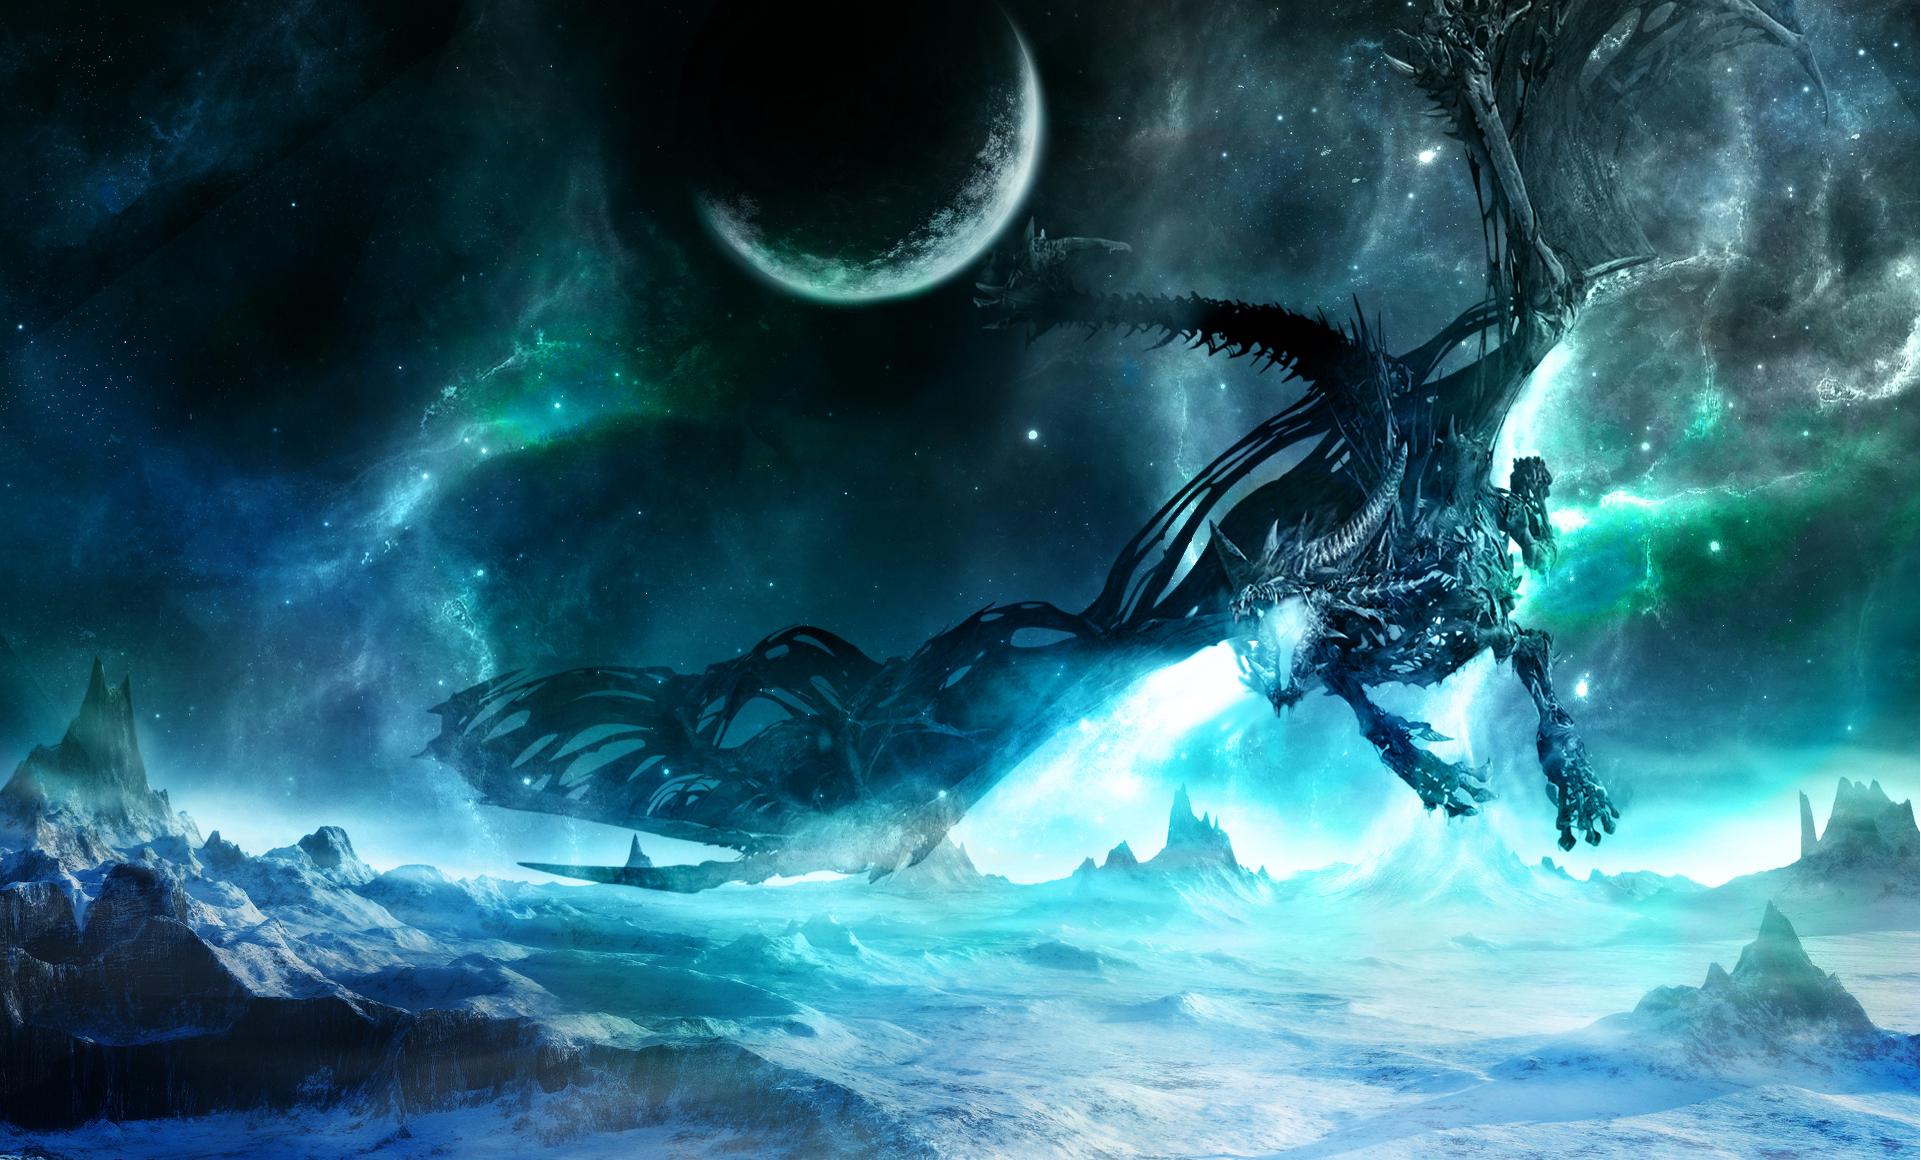 Free World Of Warcraft: Wrath Of The Lich King Wallpapers